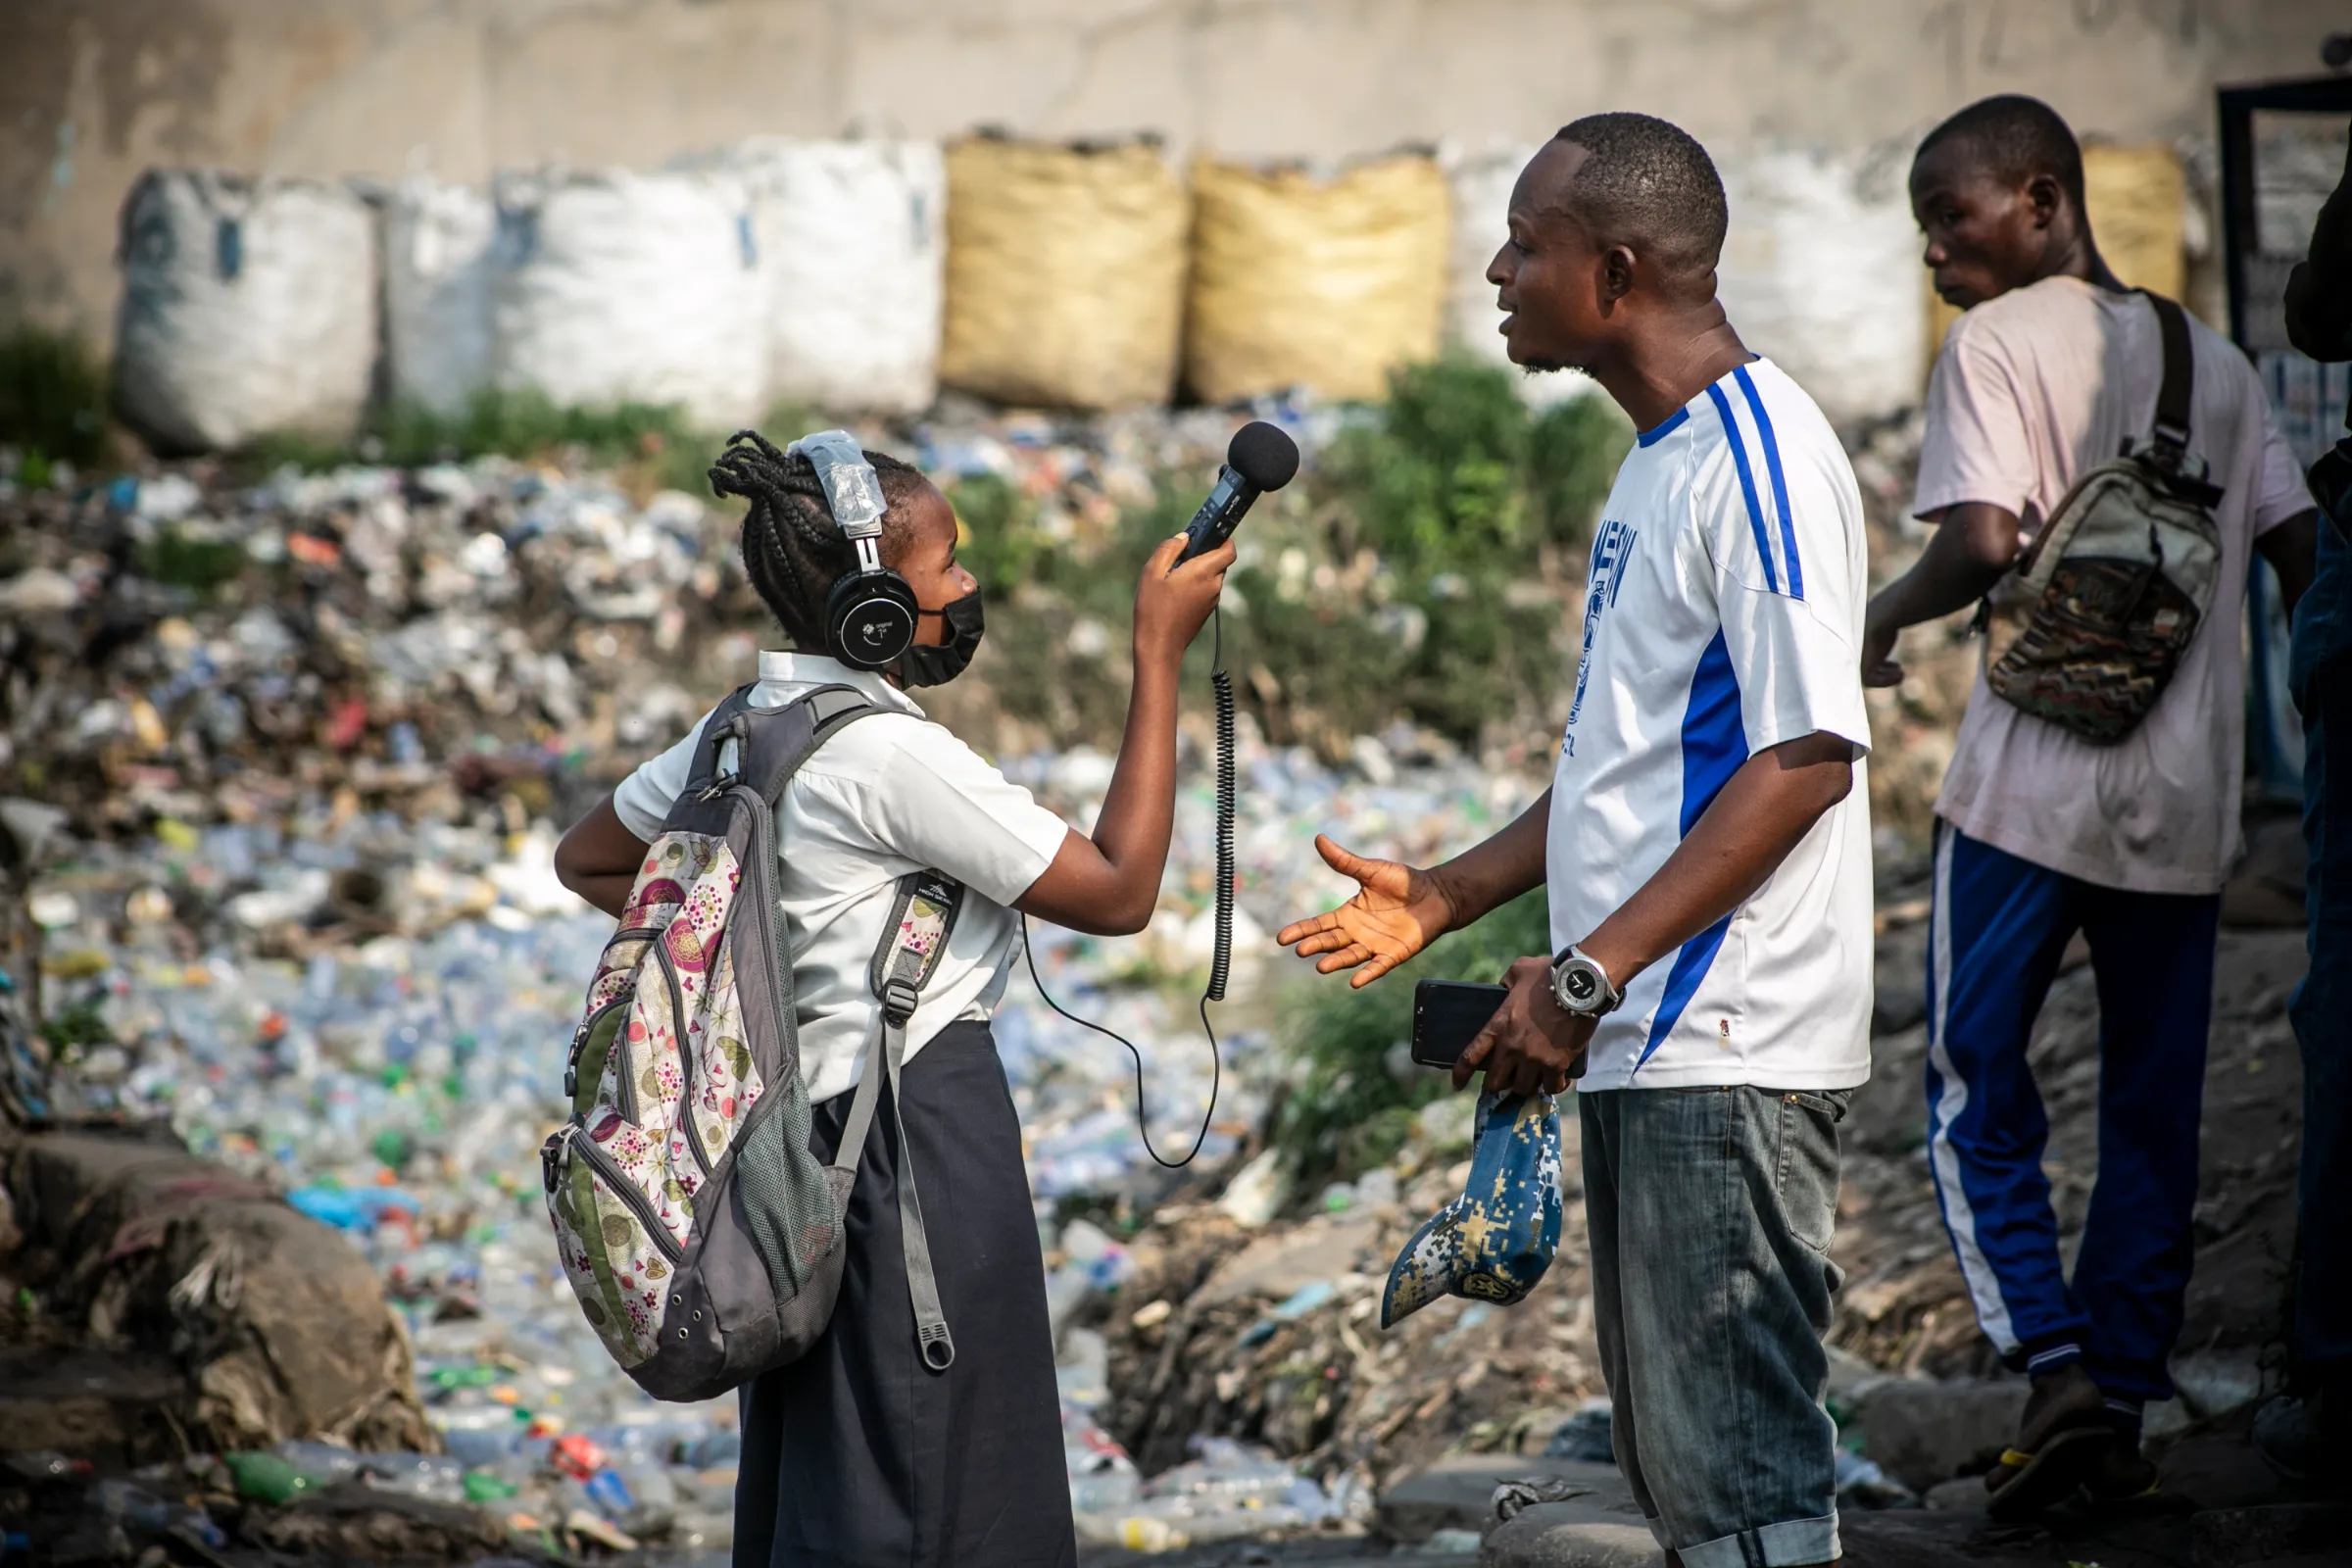 Emilie Zikudieka, a young reporter from the Children’s Radio Foundation, interviews a resident of Kalamu on the plastic waste in the rivers in Kinshasa, The Democratic Republic of Congo, March 3, 2021. Ley Uwera/Handout via Thomson Reuters Foundation